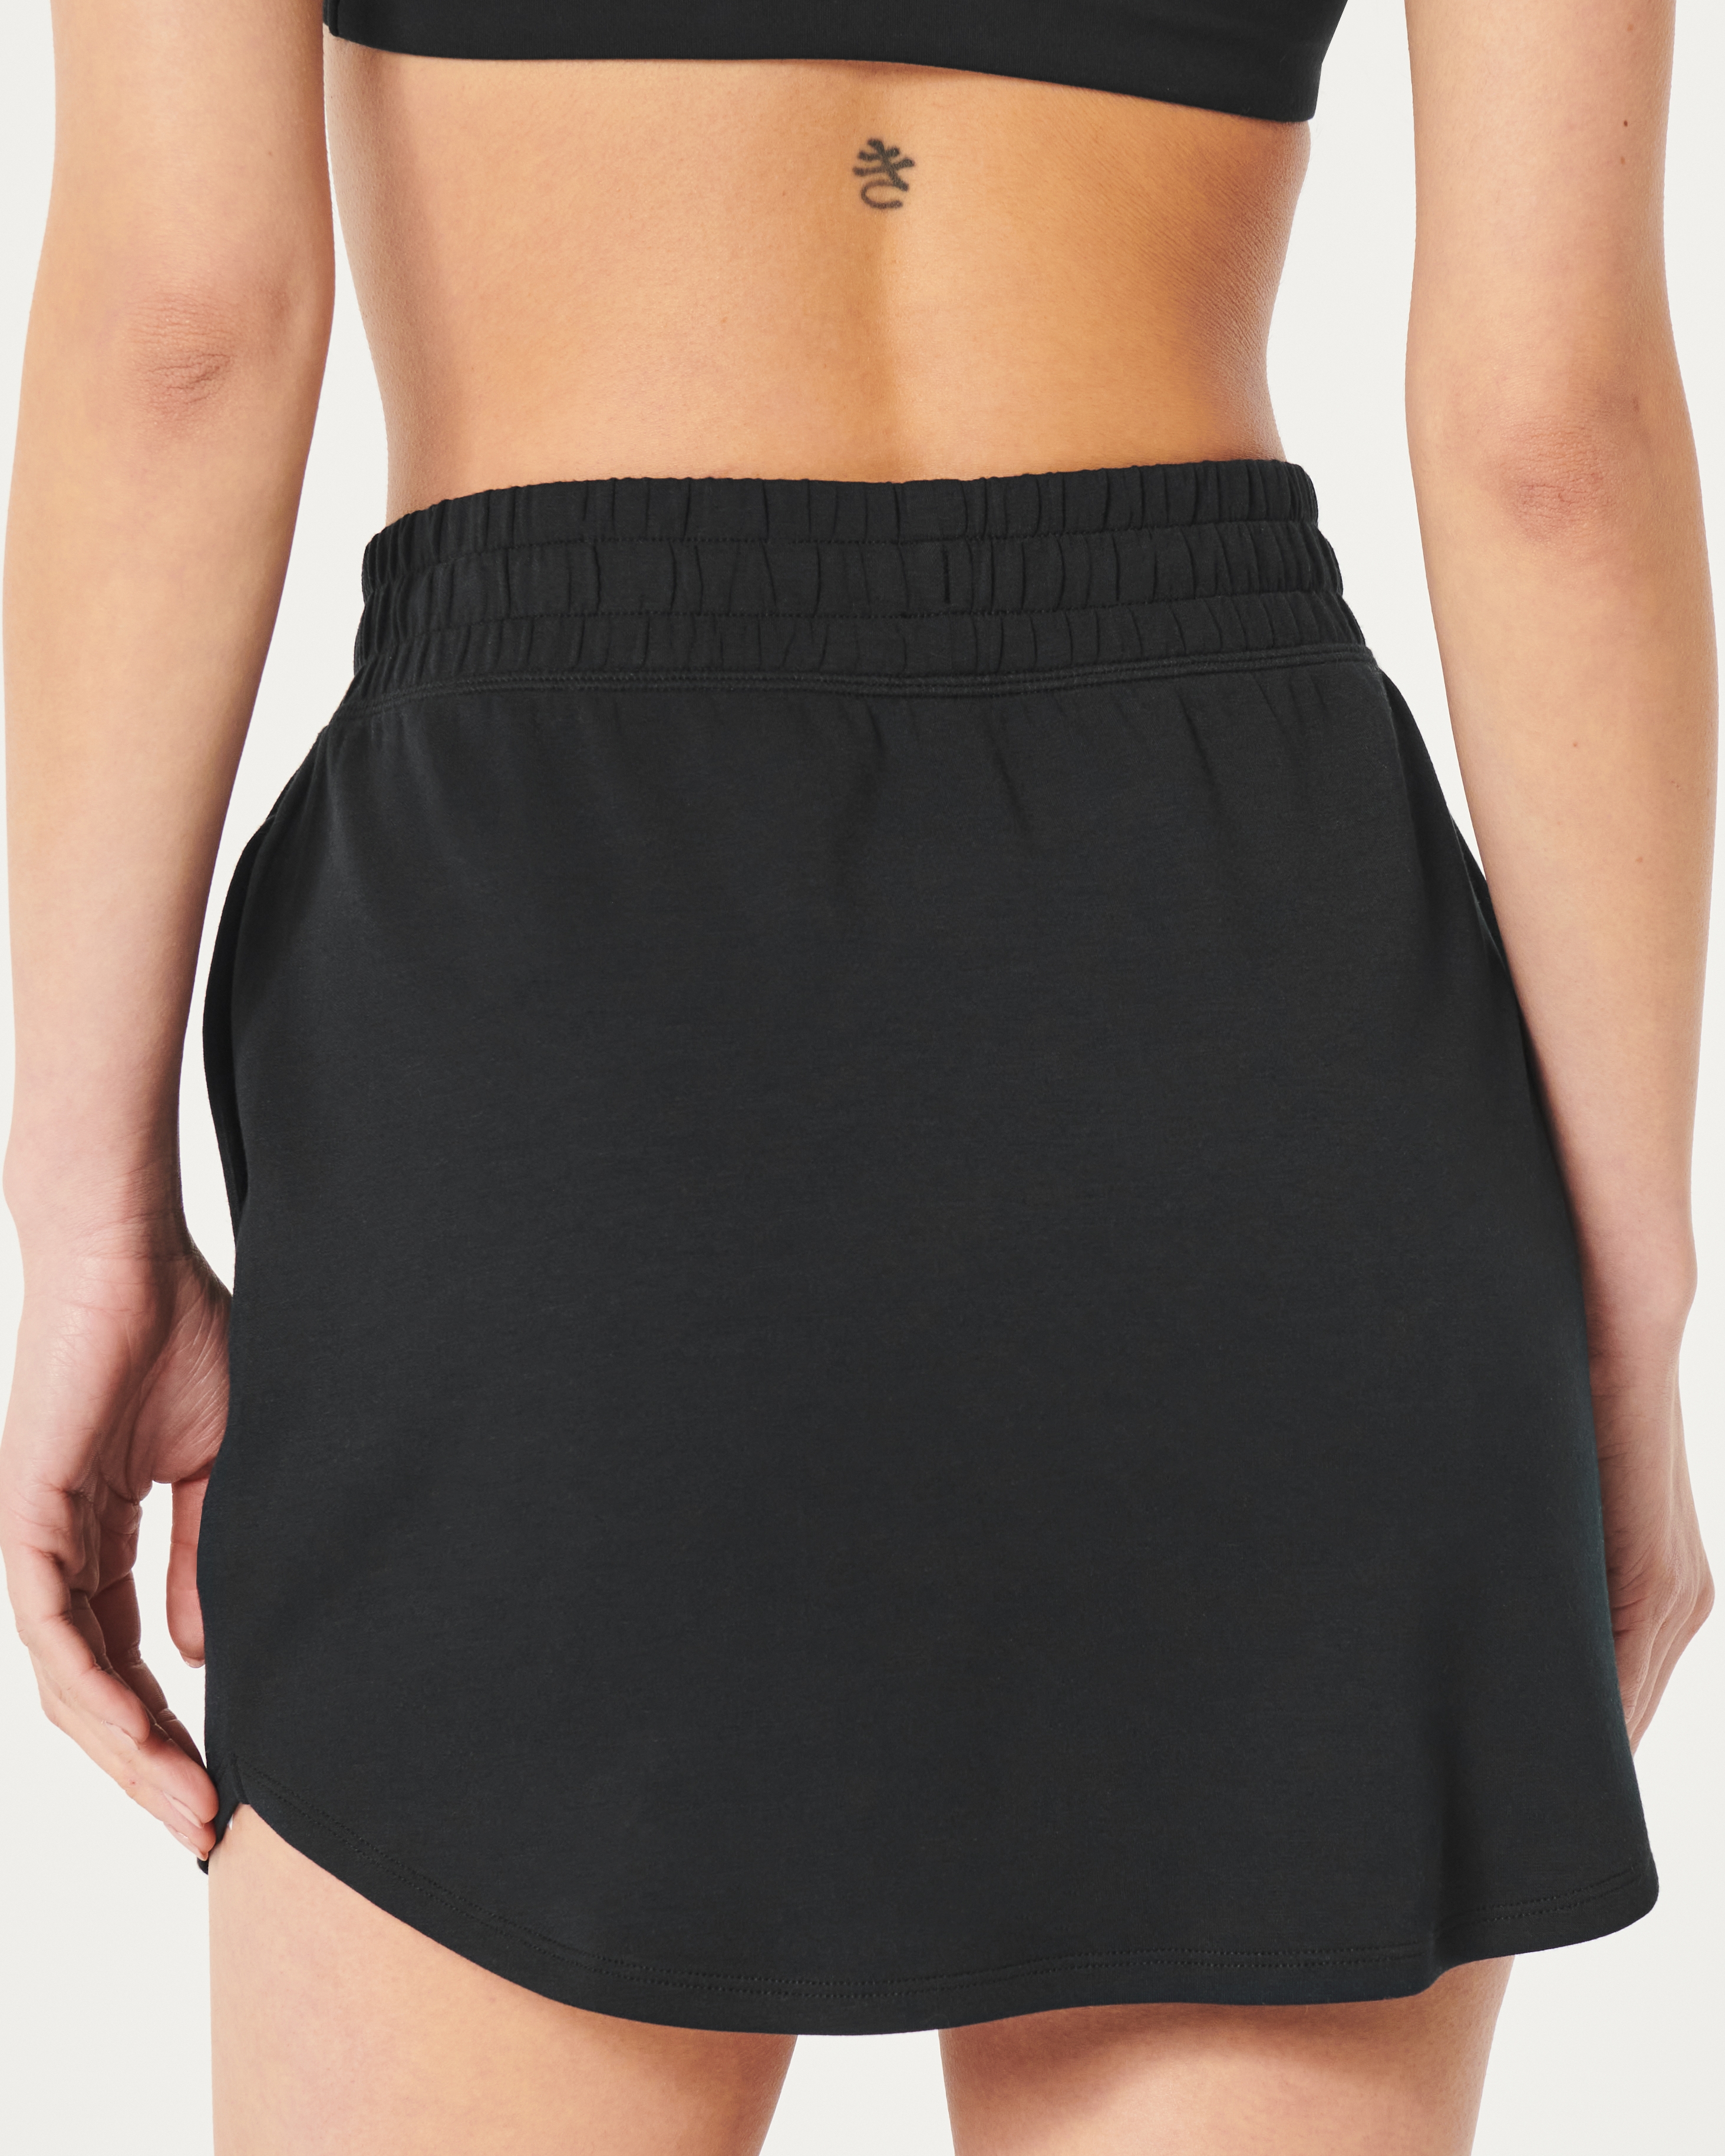 Gilly Hicks Active Cooldown Skirt